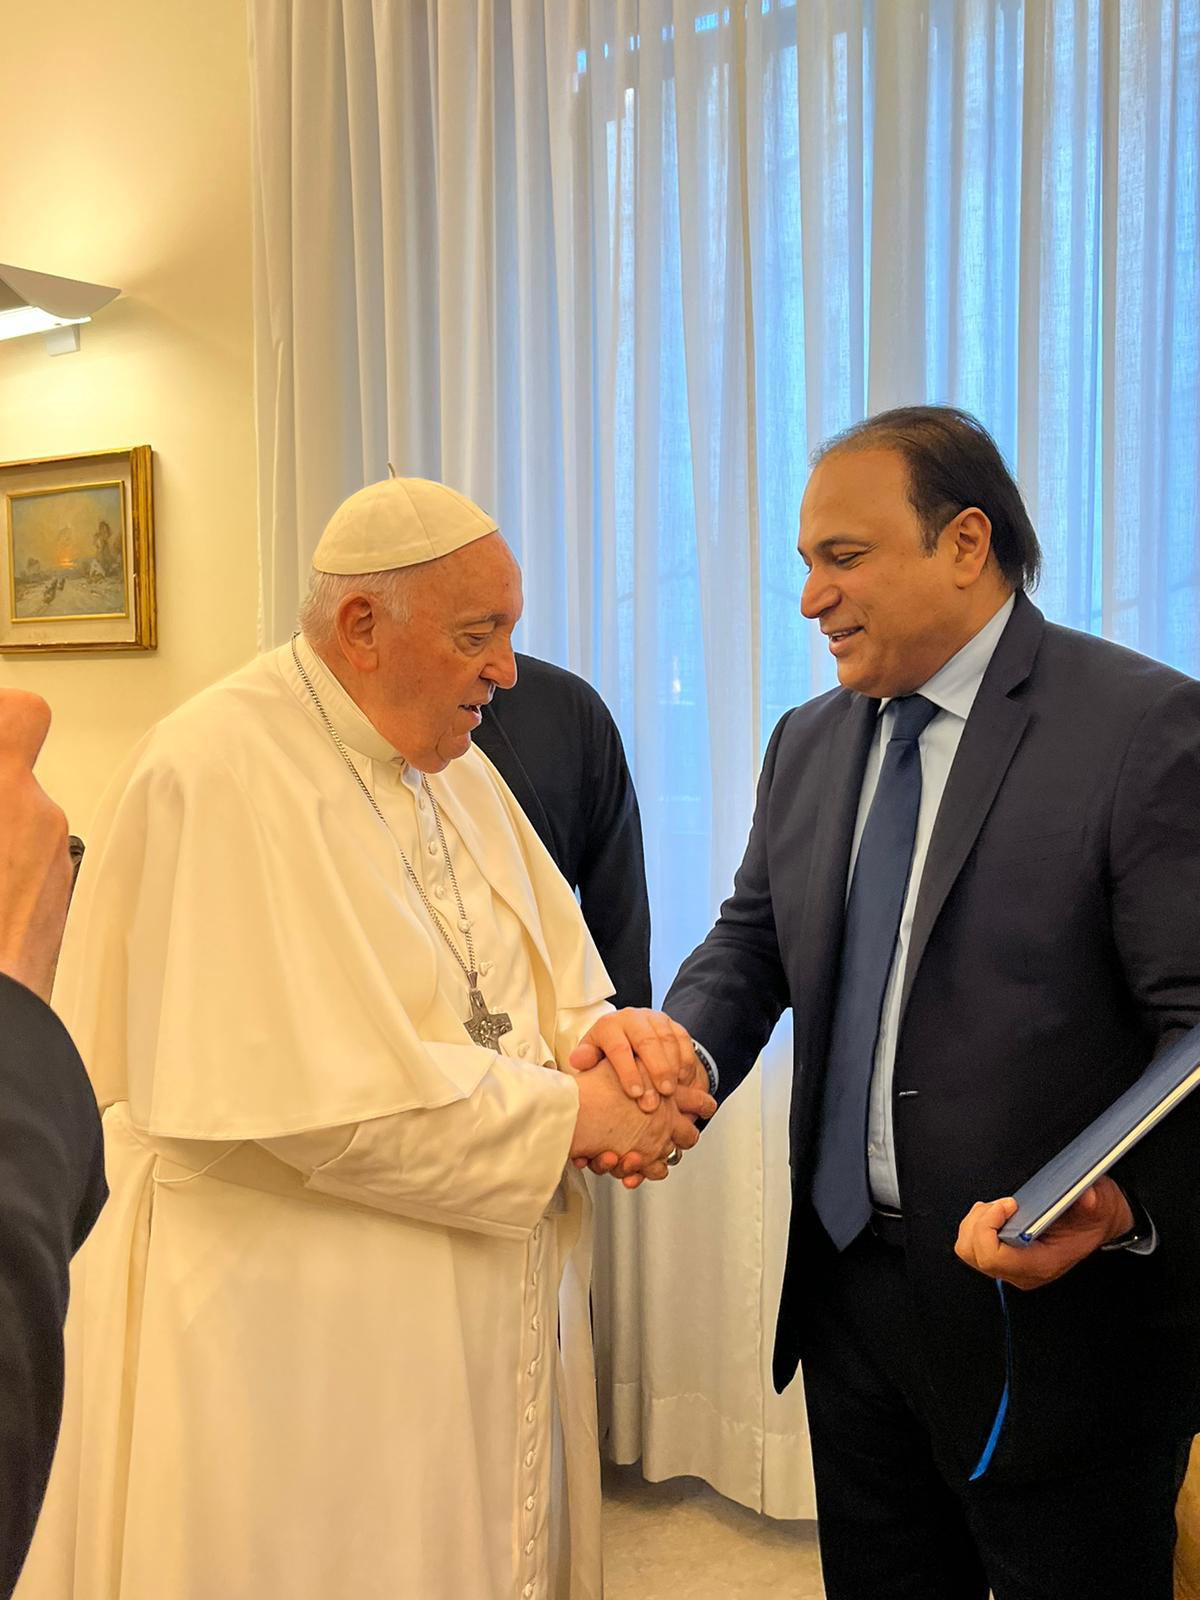 Dr. Zuhair Alharthi, Secretary General, International Dialogue Centre (KAICIID) in Audience with Pope Francis